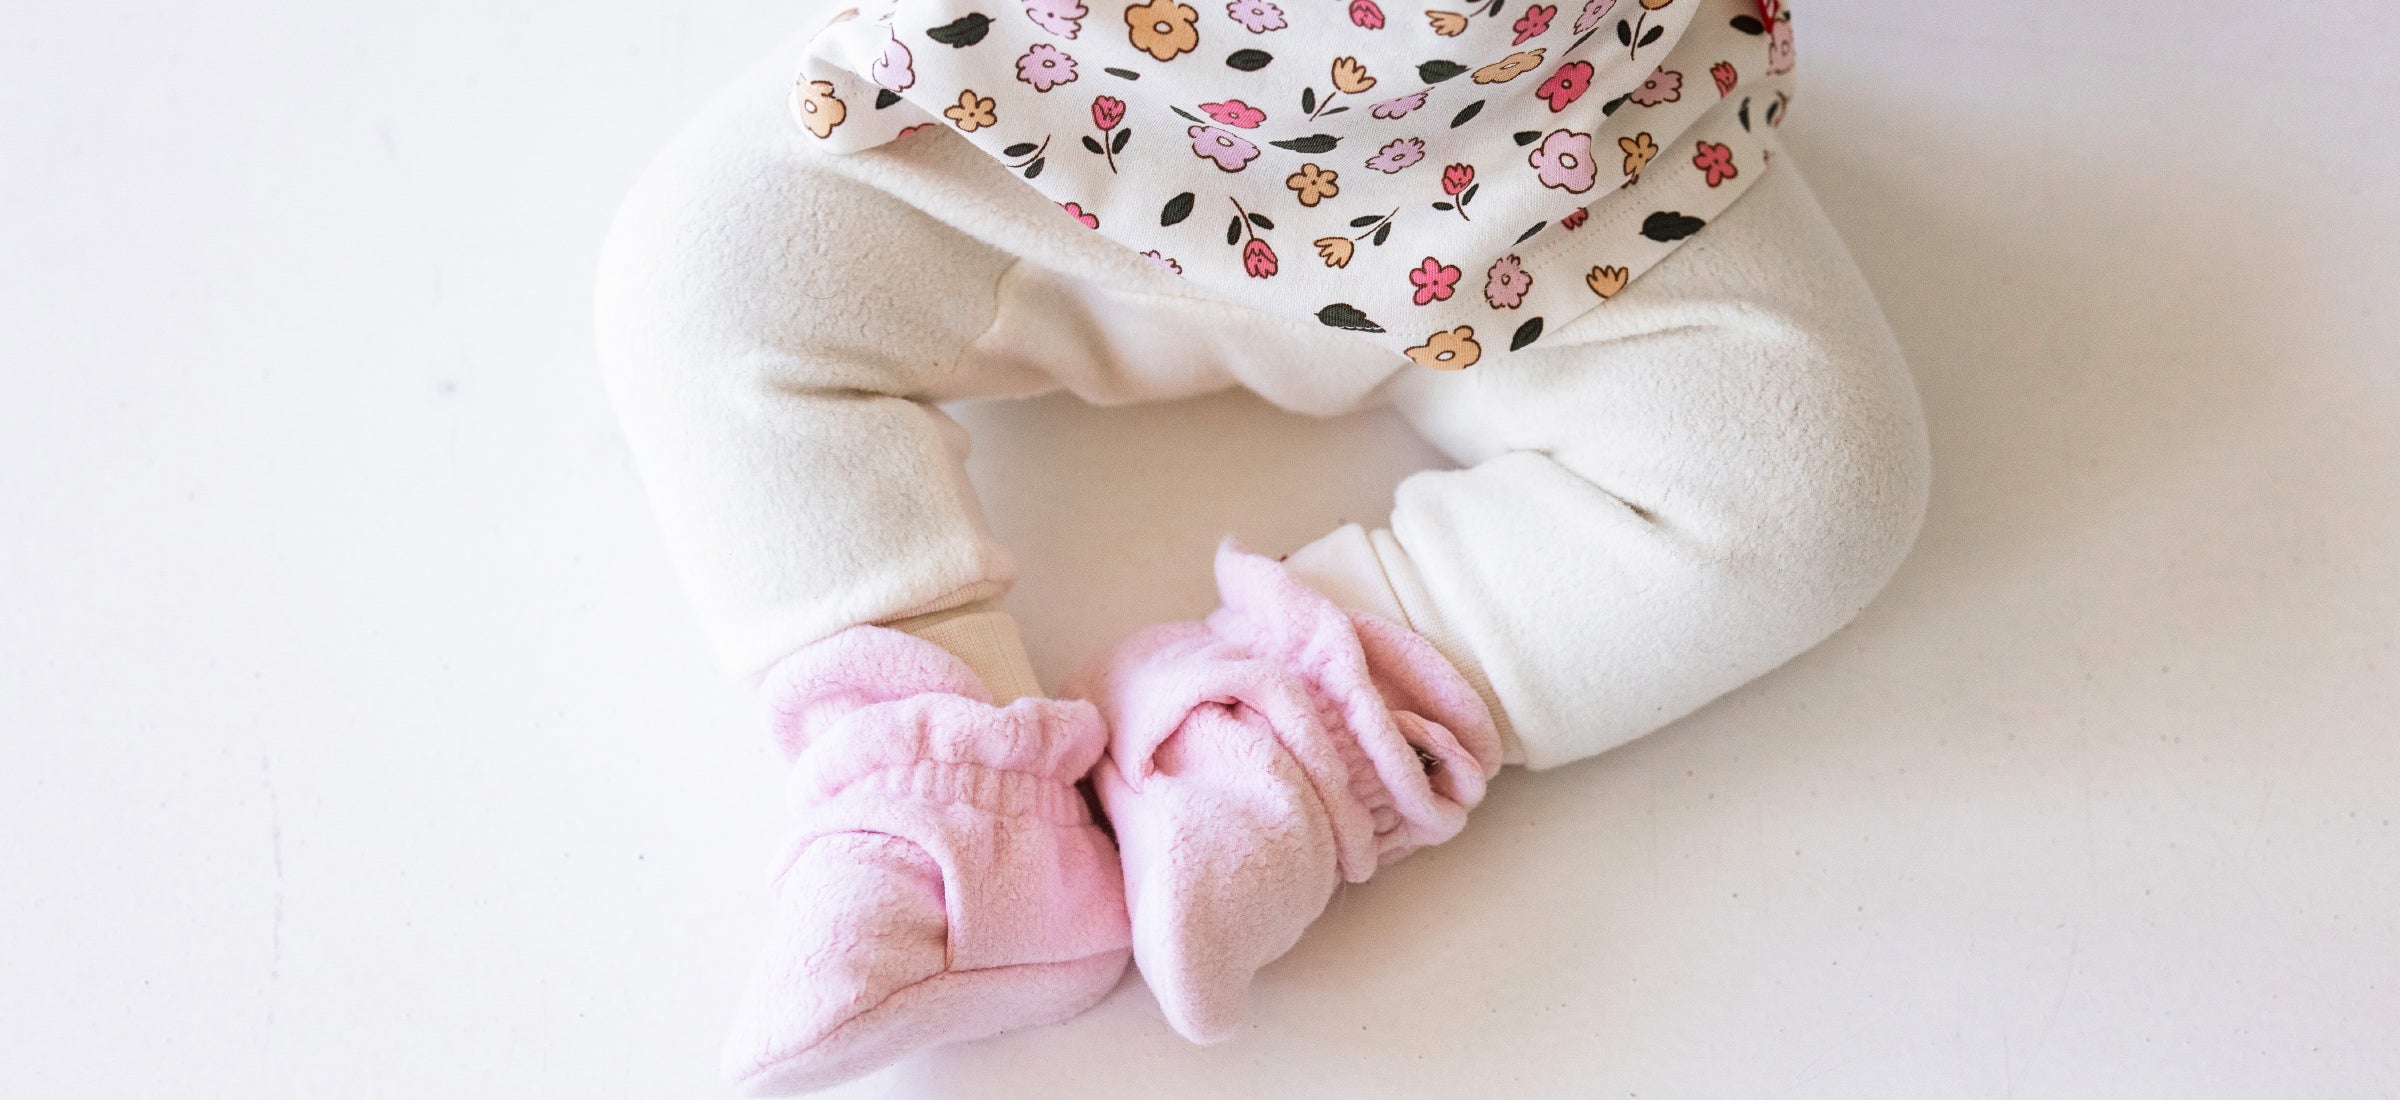 Designer Baby Clothes, Shoes & Accessories